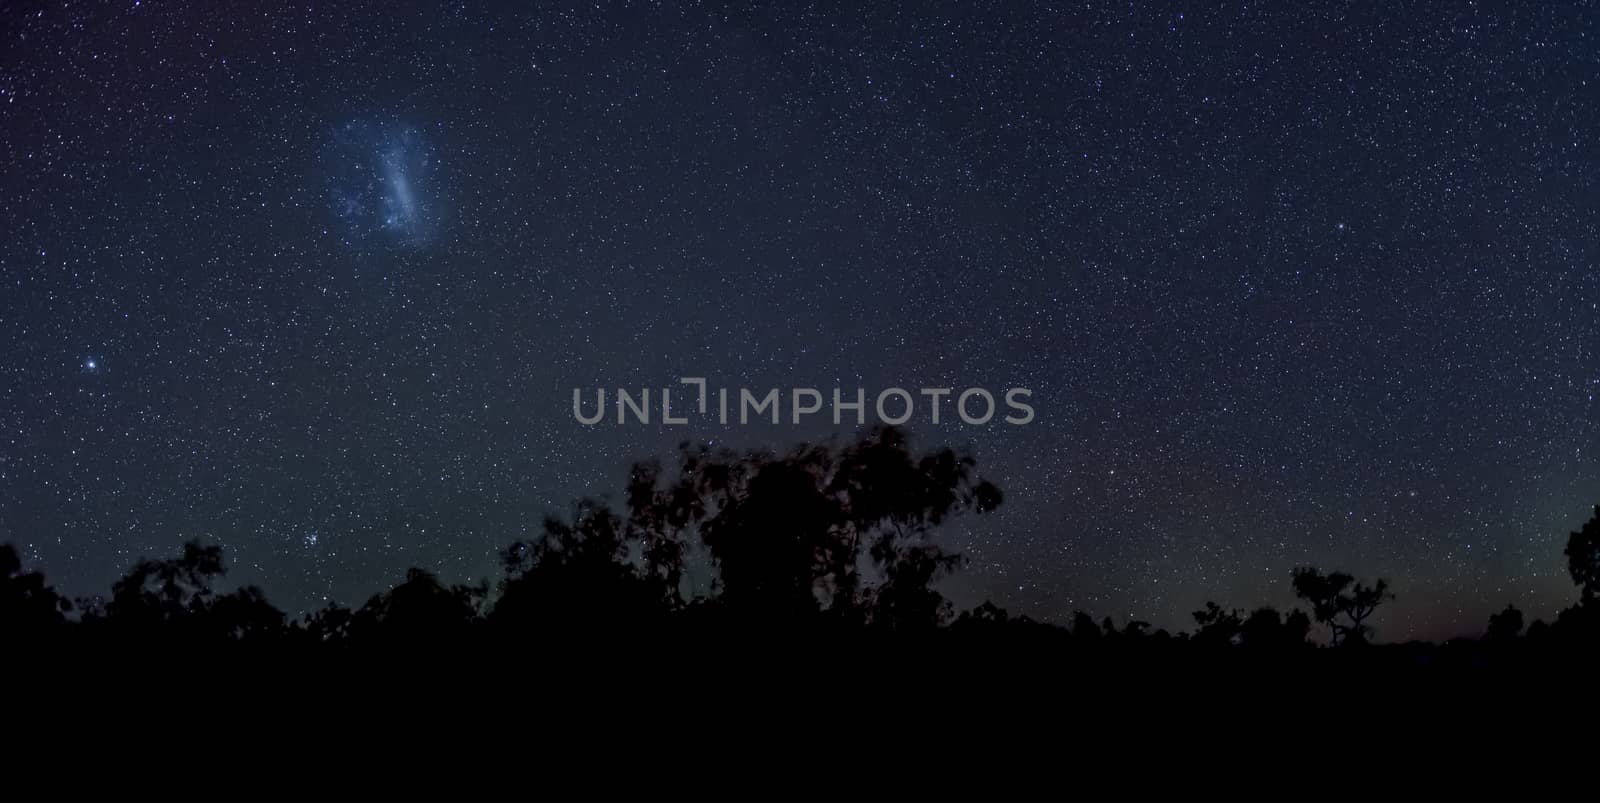 Magellanic Clouds in southern hemisphere night sky above silhouettes of trees in australian outback by MXW_Stock